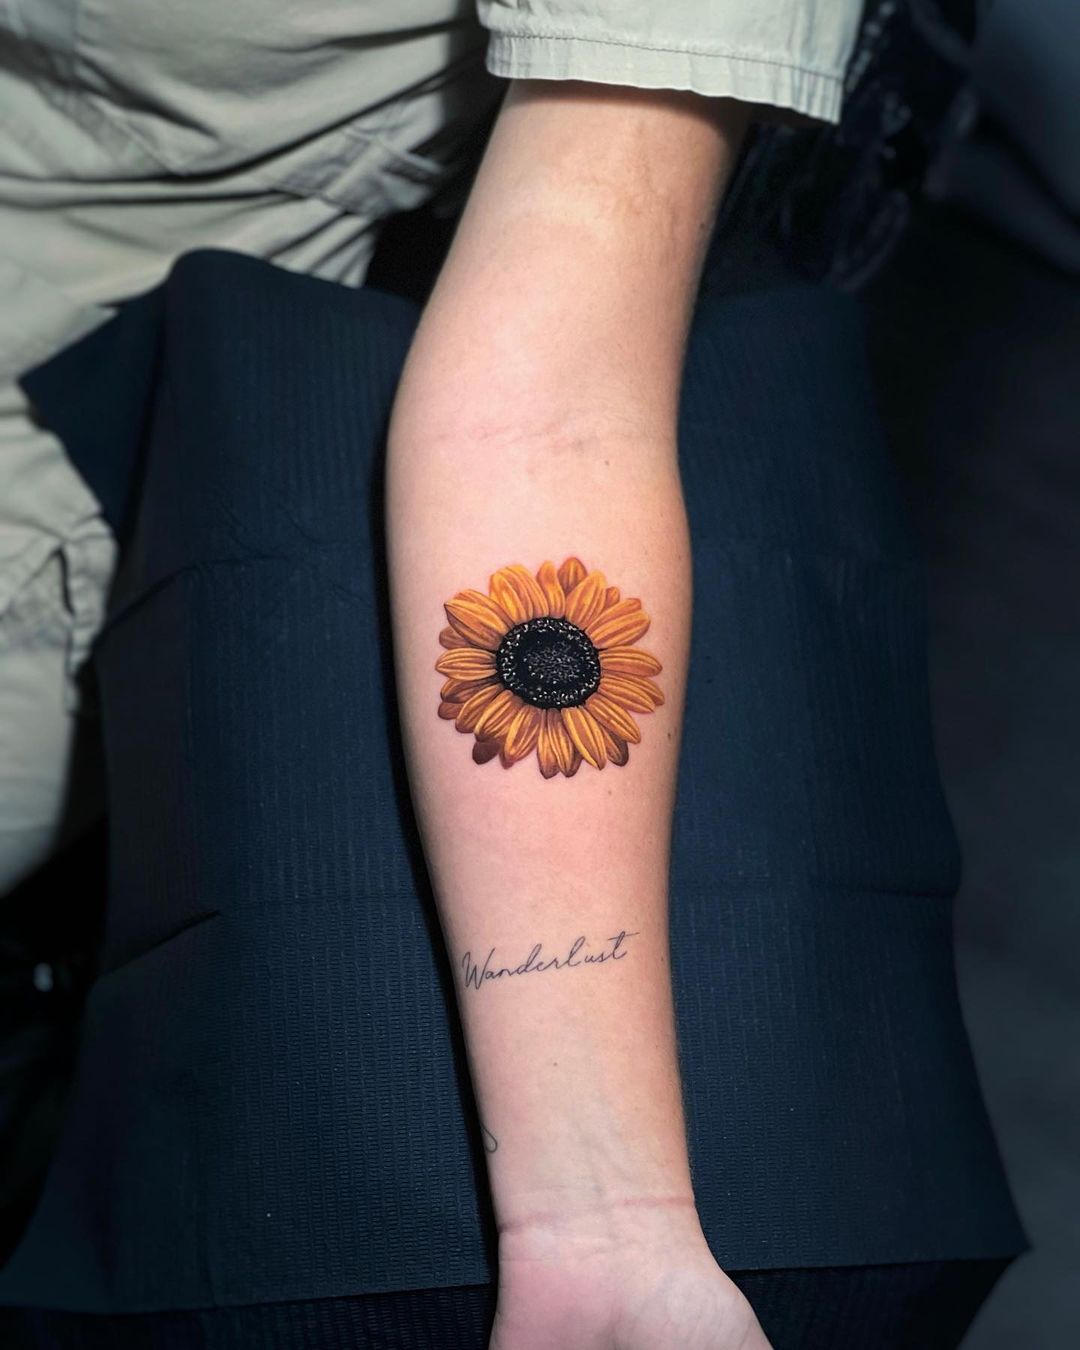 Custom Tattoo Designs - Check out this SUNFLOWER TATTOO done in the dot  work style!🌻 This tattoo uses lots of dots of various boldness and sizes  in order to create shading and